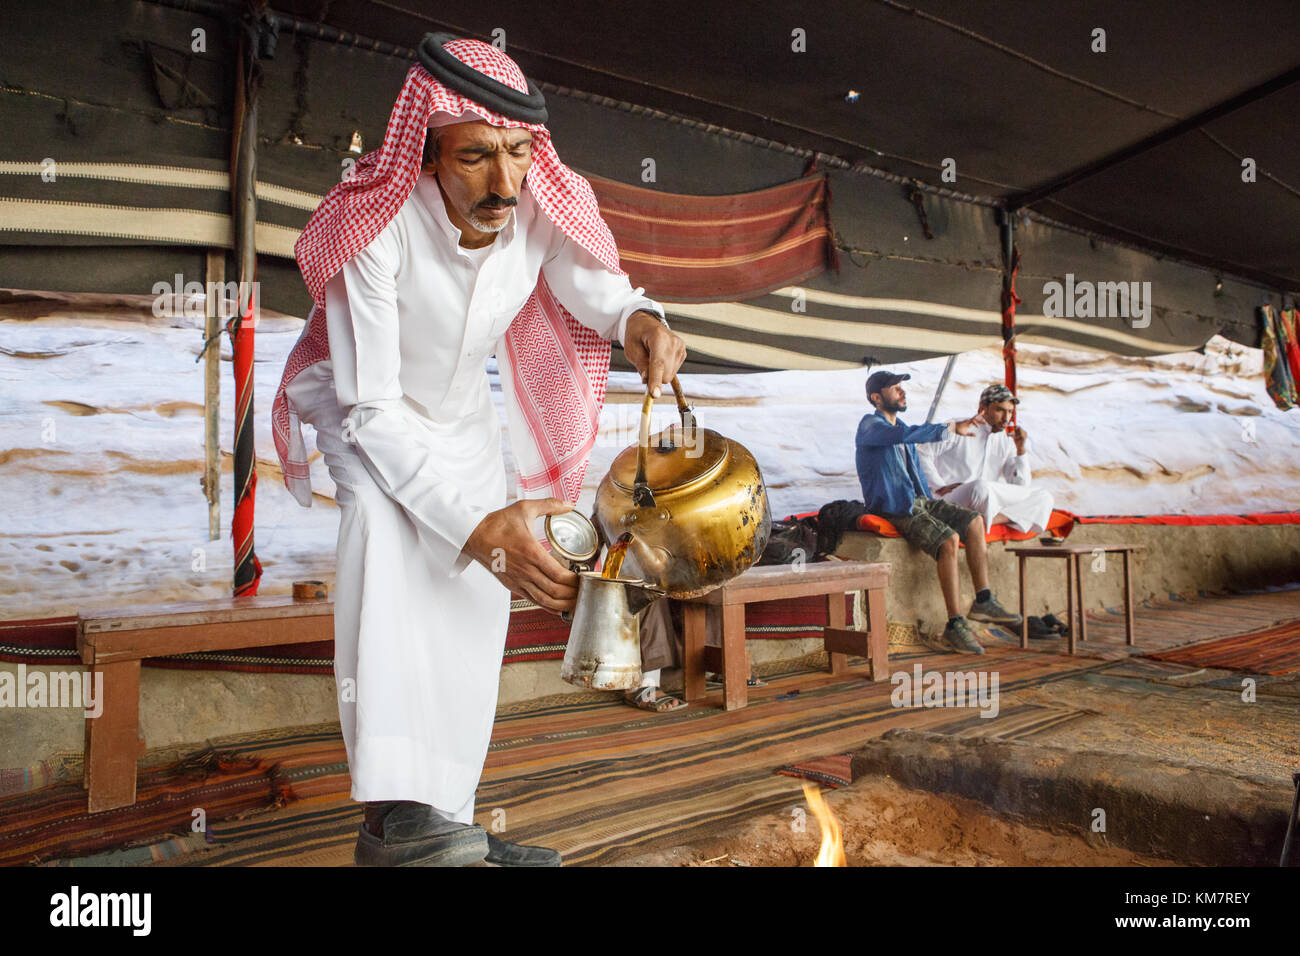 Experience the Bedouin life and hospitality in Wadi Rum, Jordan Stock Photo